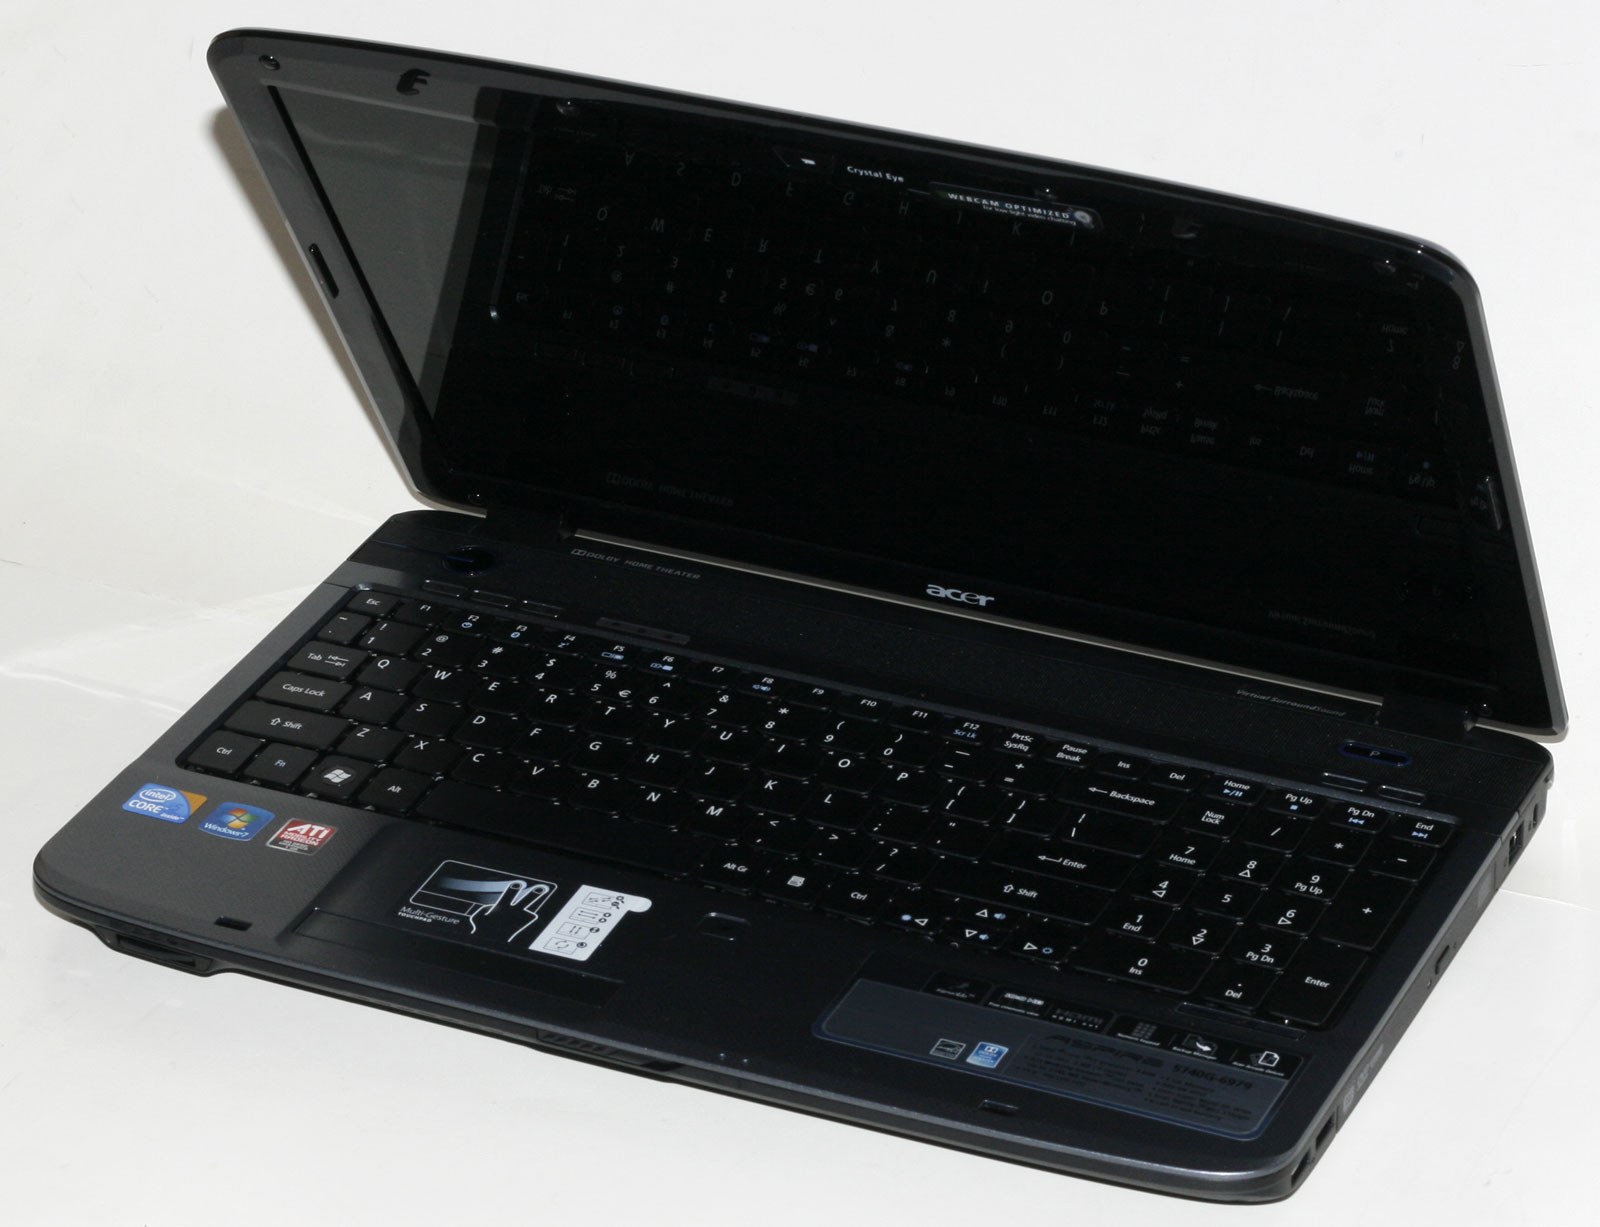 Acer Aspire AS5740G-6979: Budget Priced but Great Gaming